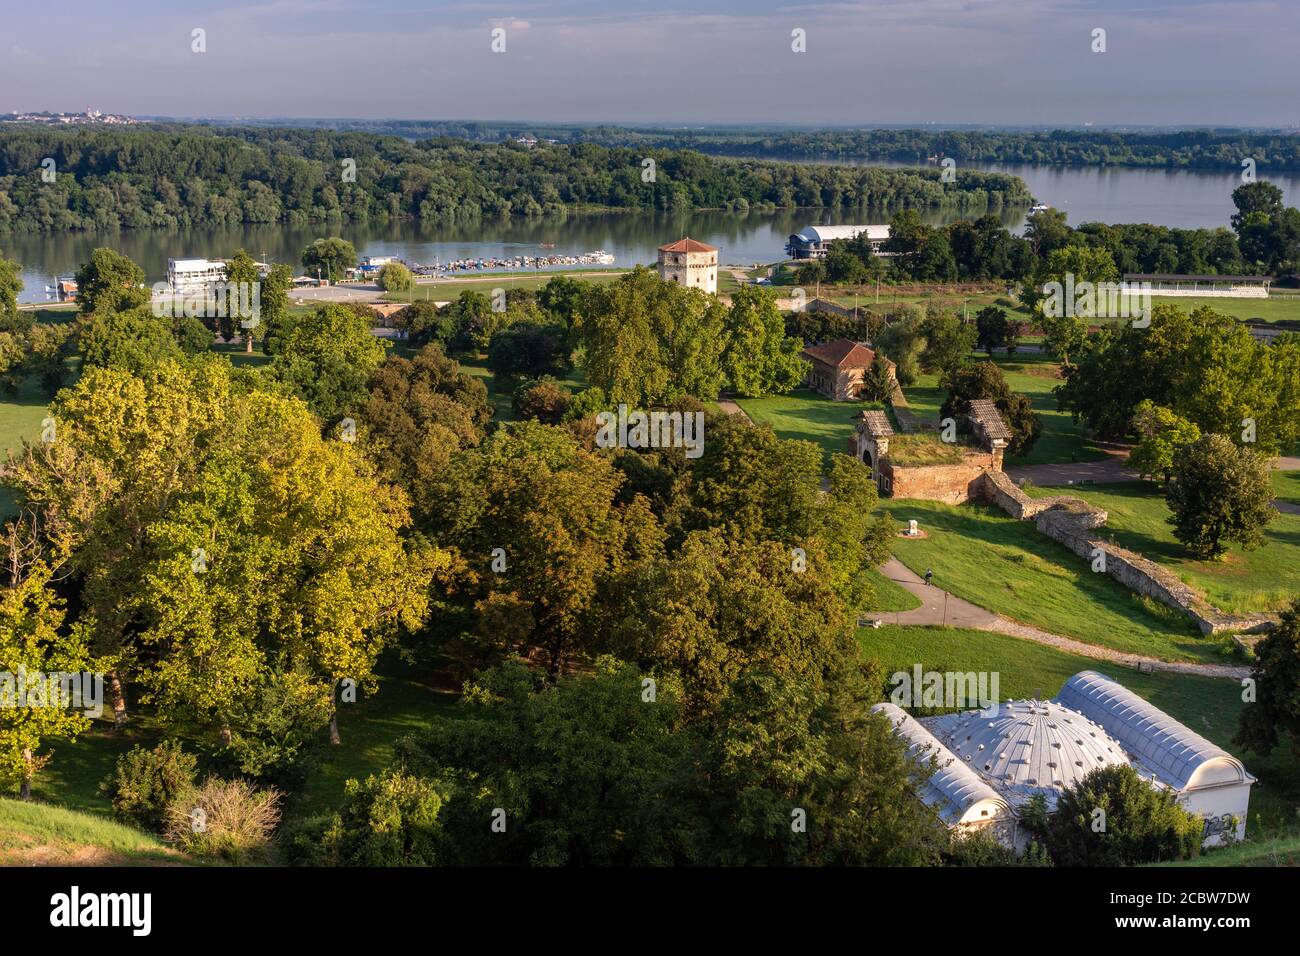 Lower Kalemegdan park and confluence of rivers Danube and Sava, view from Belgrade Fortress in Belgrade, Serbia Stock Photo